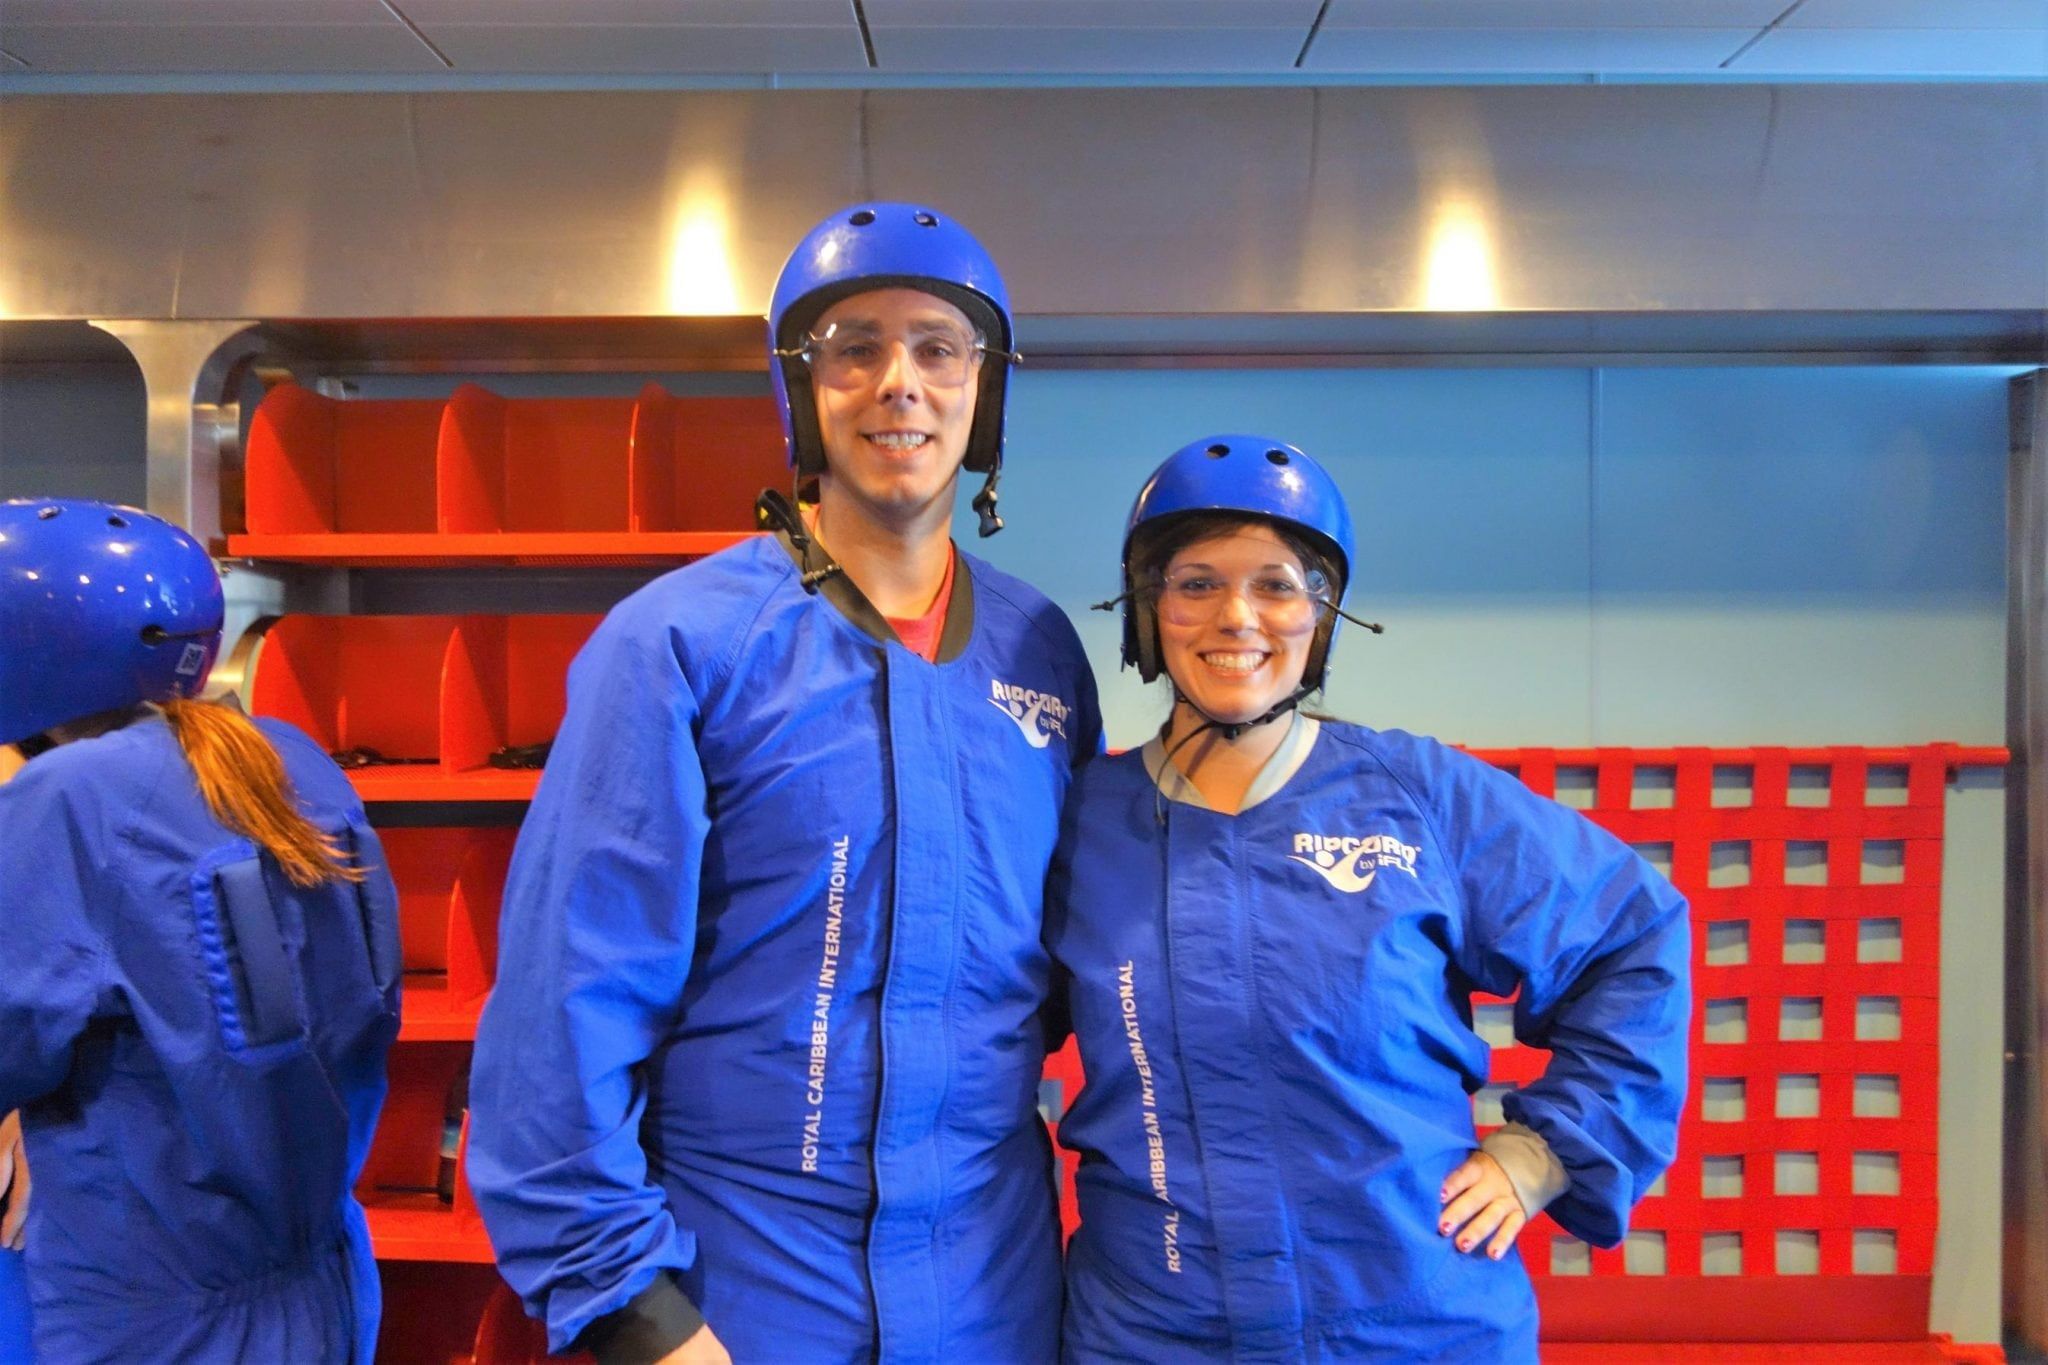 Ripcord by iFLY on Anthem of the Seas